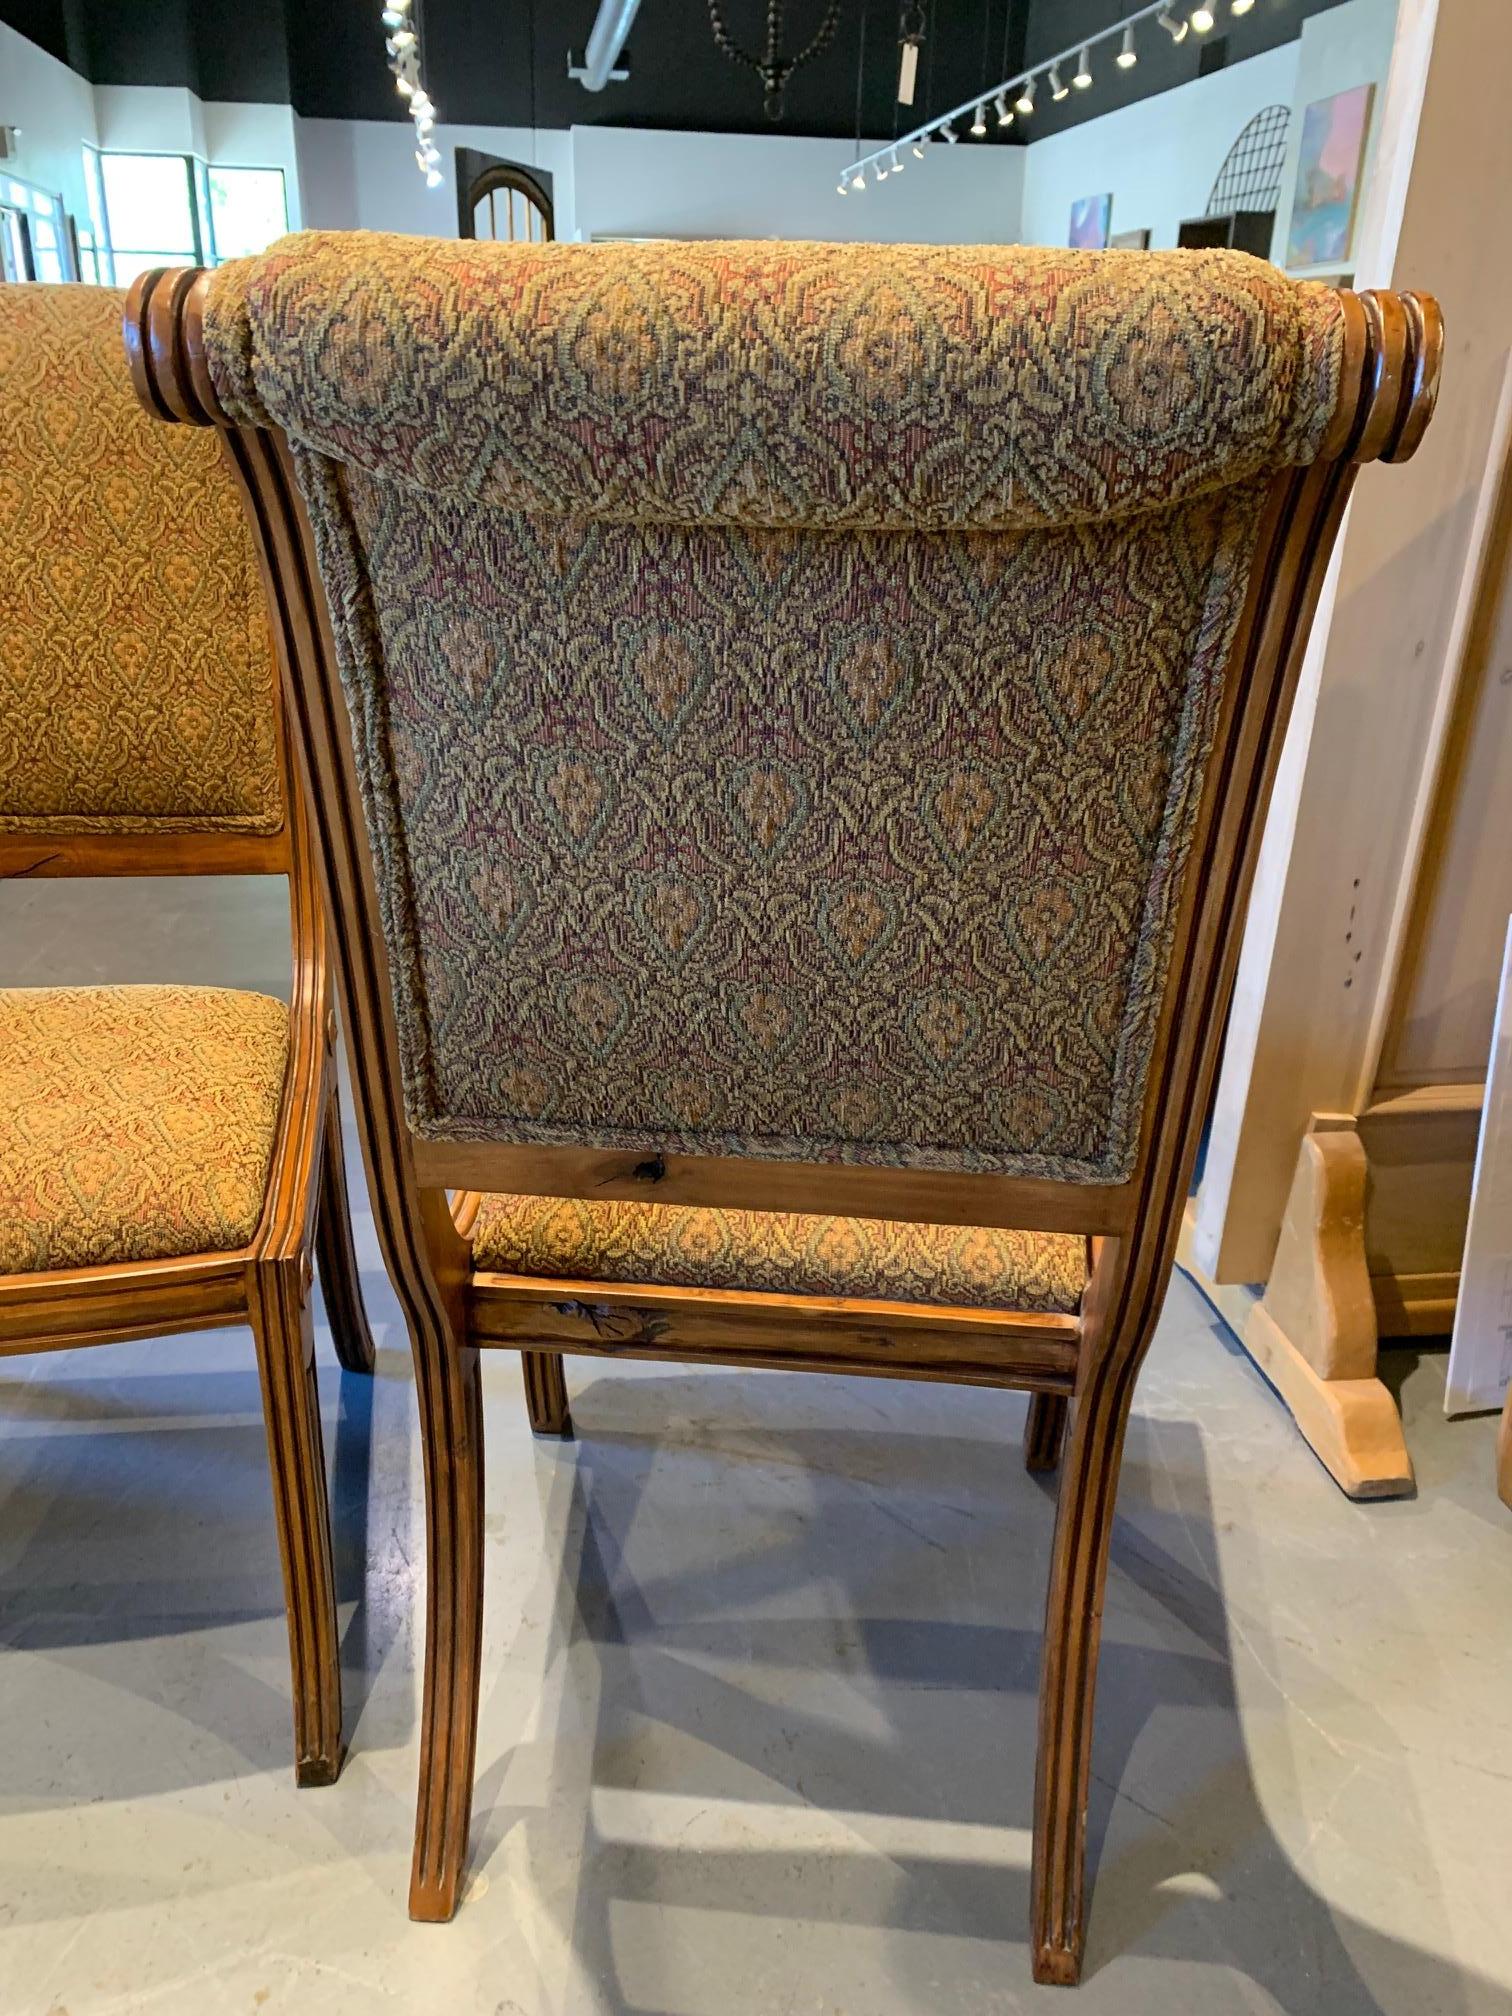 Timeless Ernest Thompson side chairs. Beautifully upholstered with hand carved details.
Made in Alder with a custom finish.

These are showroom floor models and that show some wear.